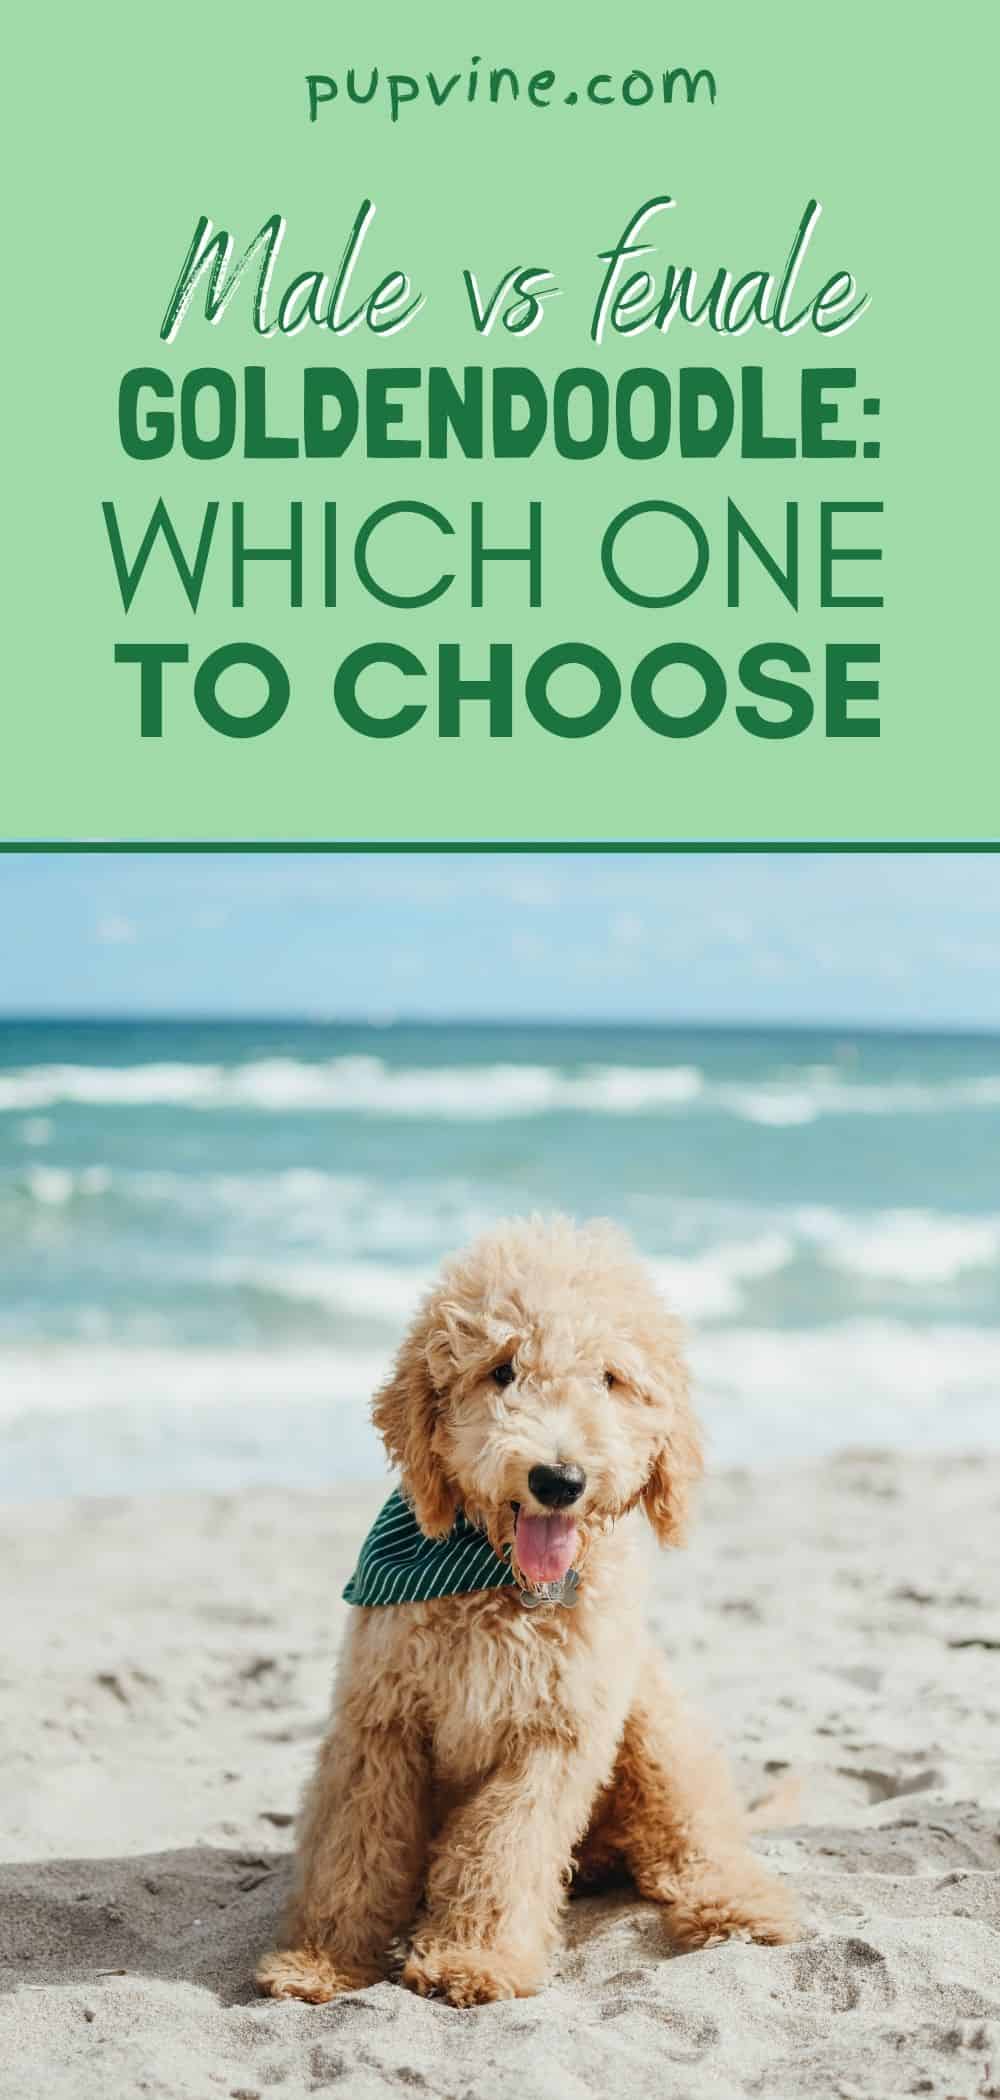 Male vs female Goldendoodle: Which one to choose